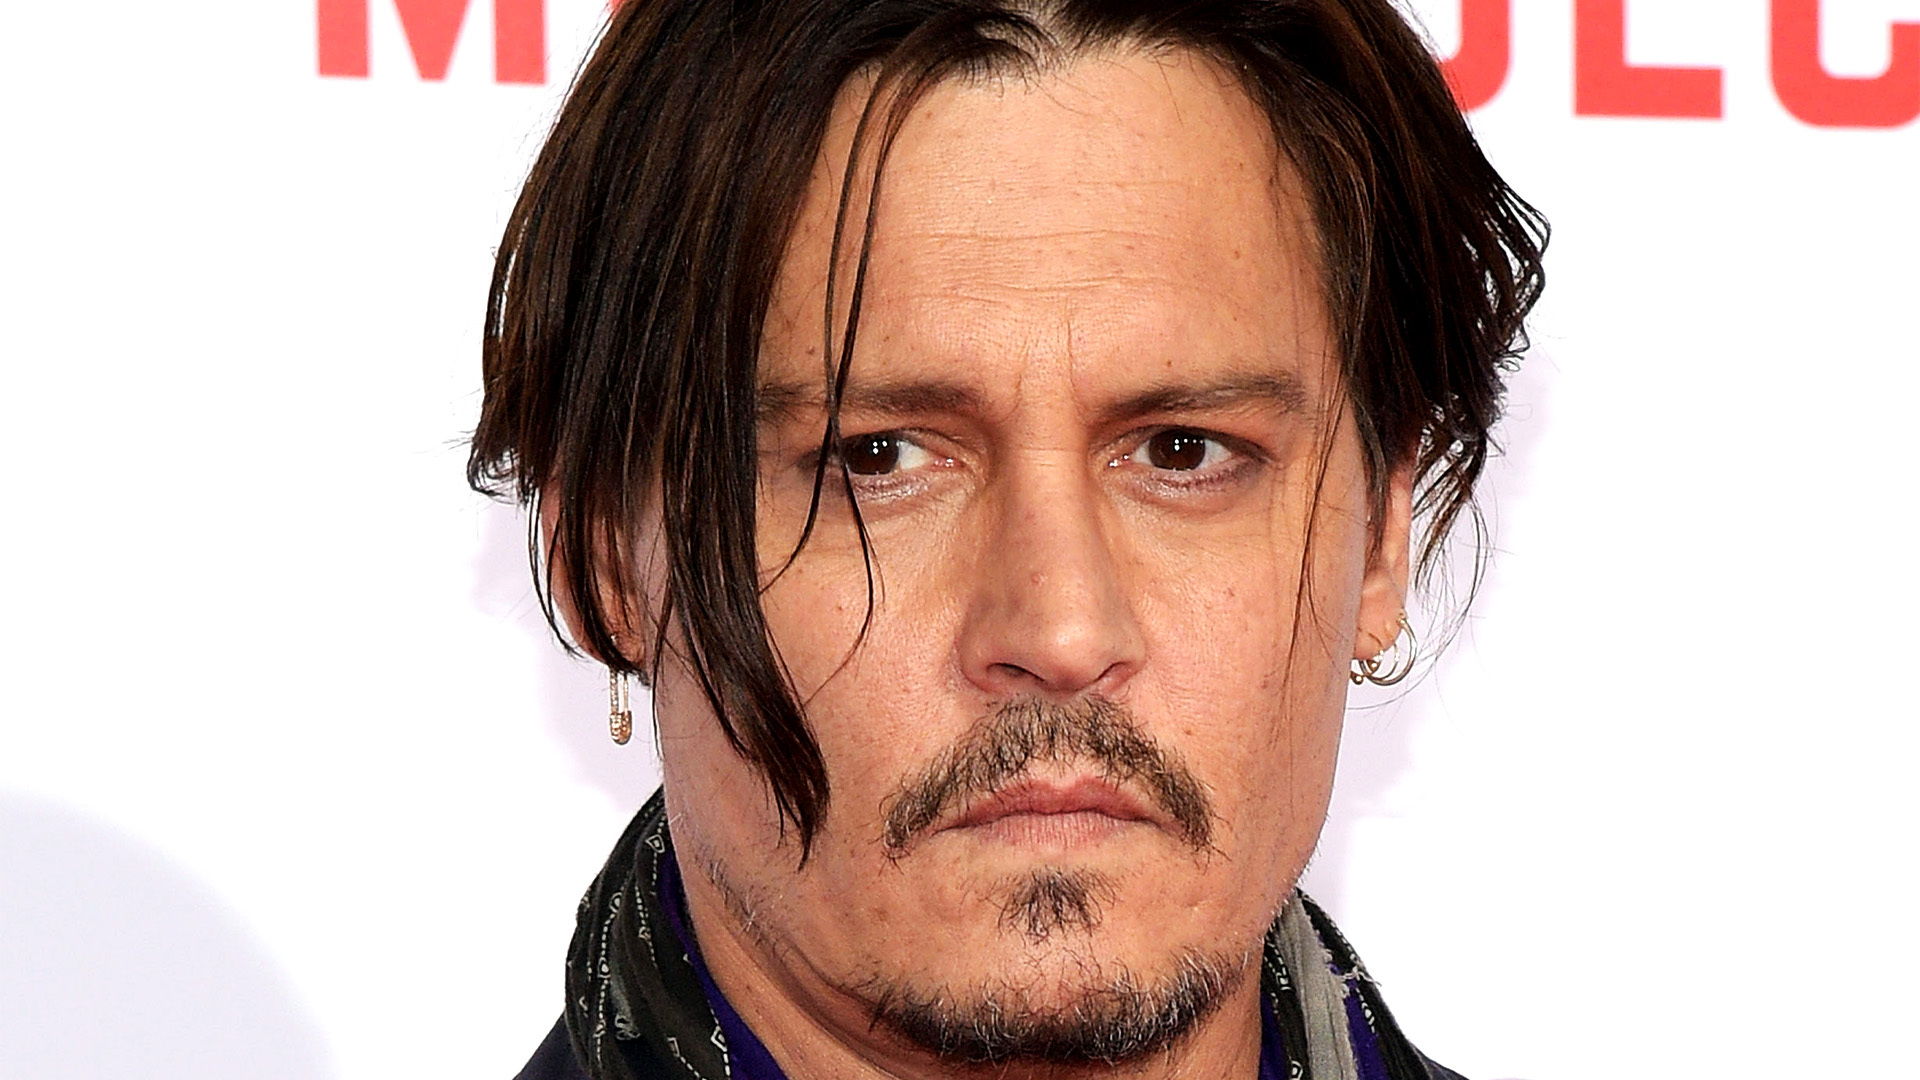 Pictures Johnny Depp Man Face Head Glance Celebrities 1920x1080